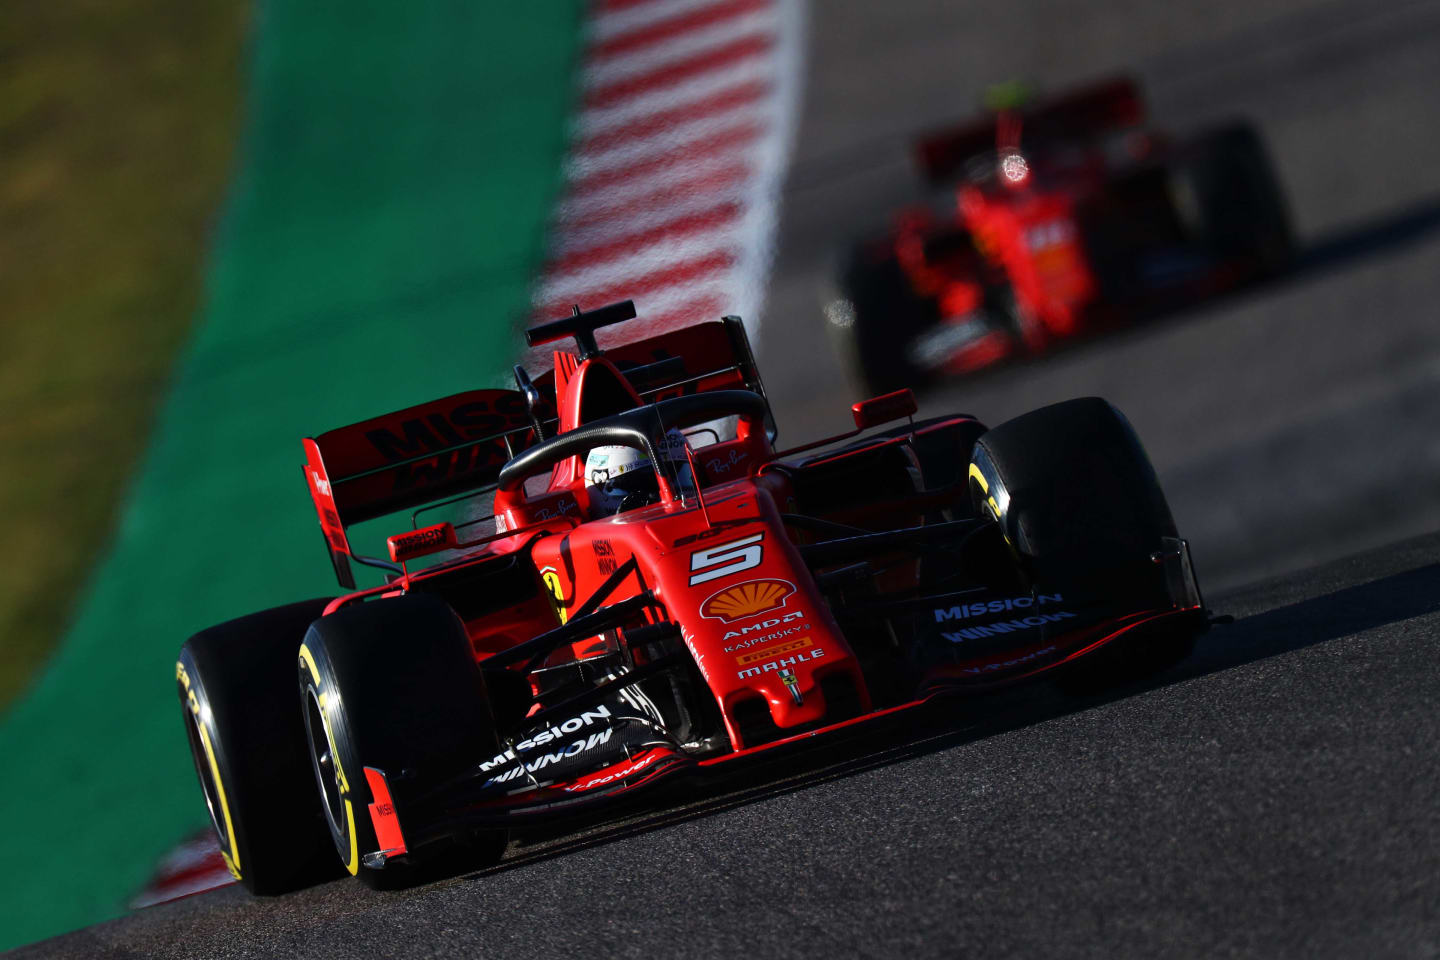 AUSTIN, TEXAS - NOVEMBER 02: Sebastian Vettel of Germany driving the (5) Scuderia Ferrari SF90 leads Charles Leclerc of Monaco driving the (16) Scuderia Ferrari SF90 on track during qualifying for the F1 Grand Prix of USA at Circuit of The Americas on November 02, 2019 in Austin, Texas. (Photo by Dan Istitene/Getty Images)